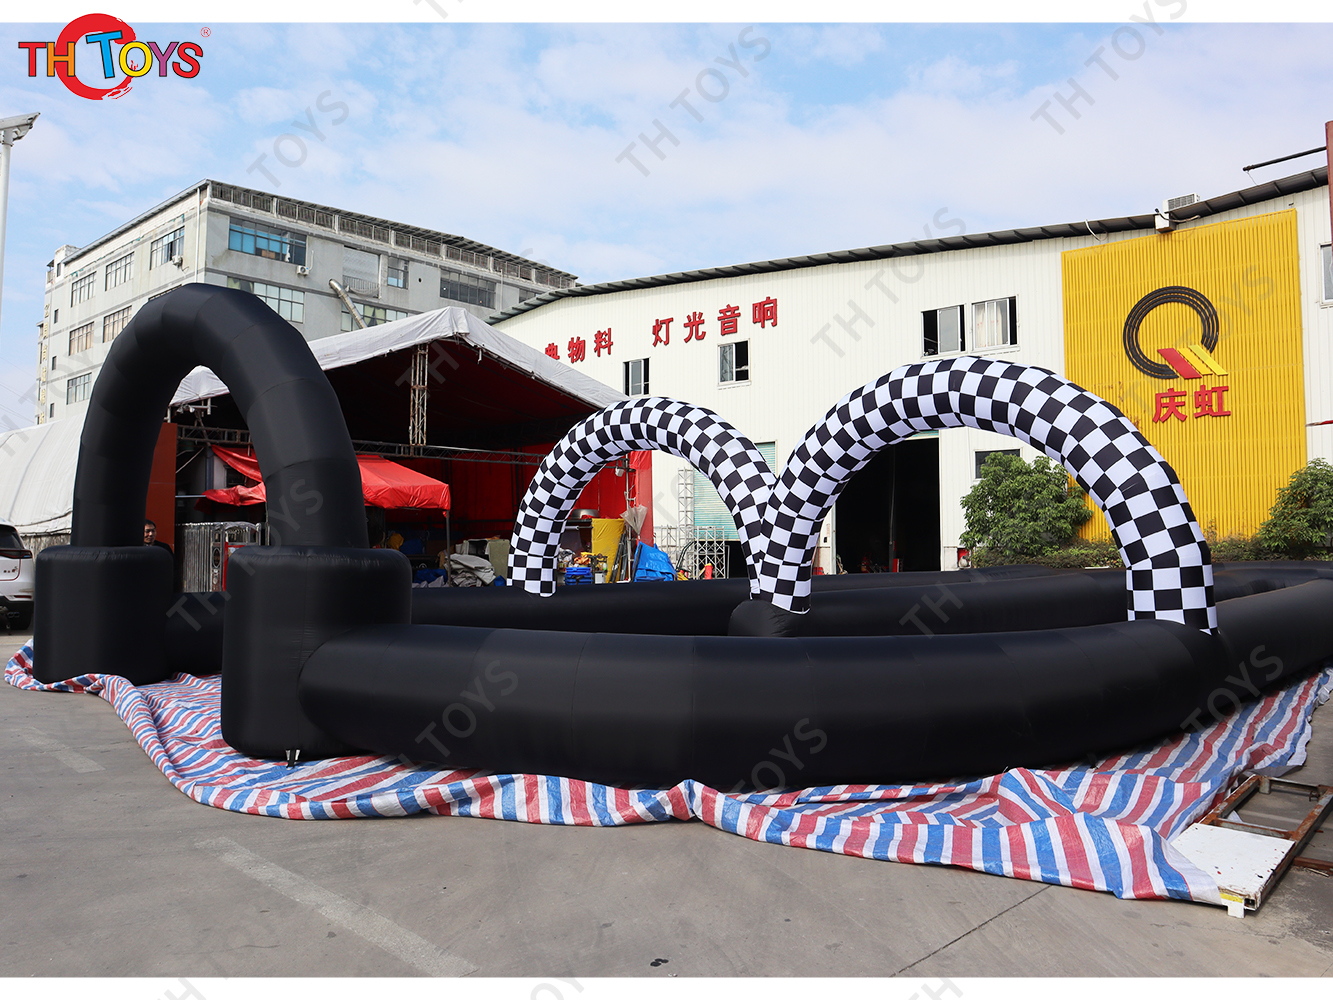 25x20m custom inflatable zorb ball go kart track, black air track inflatable race track outdoors